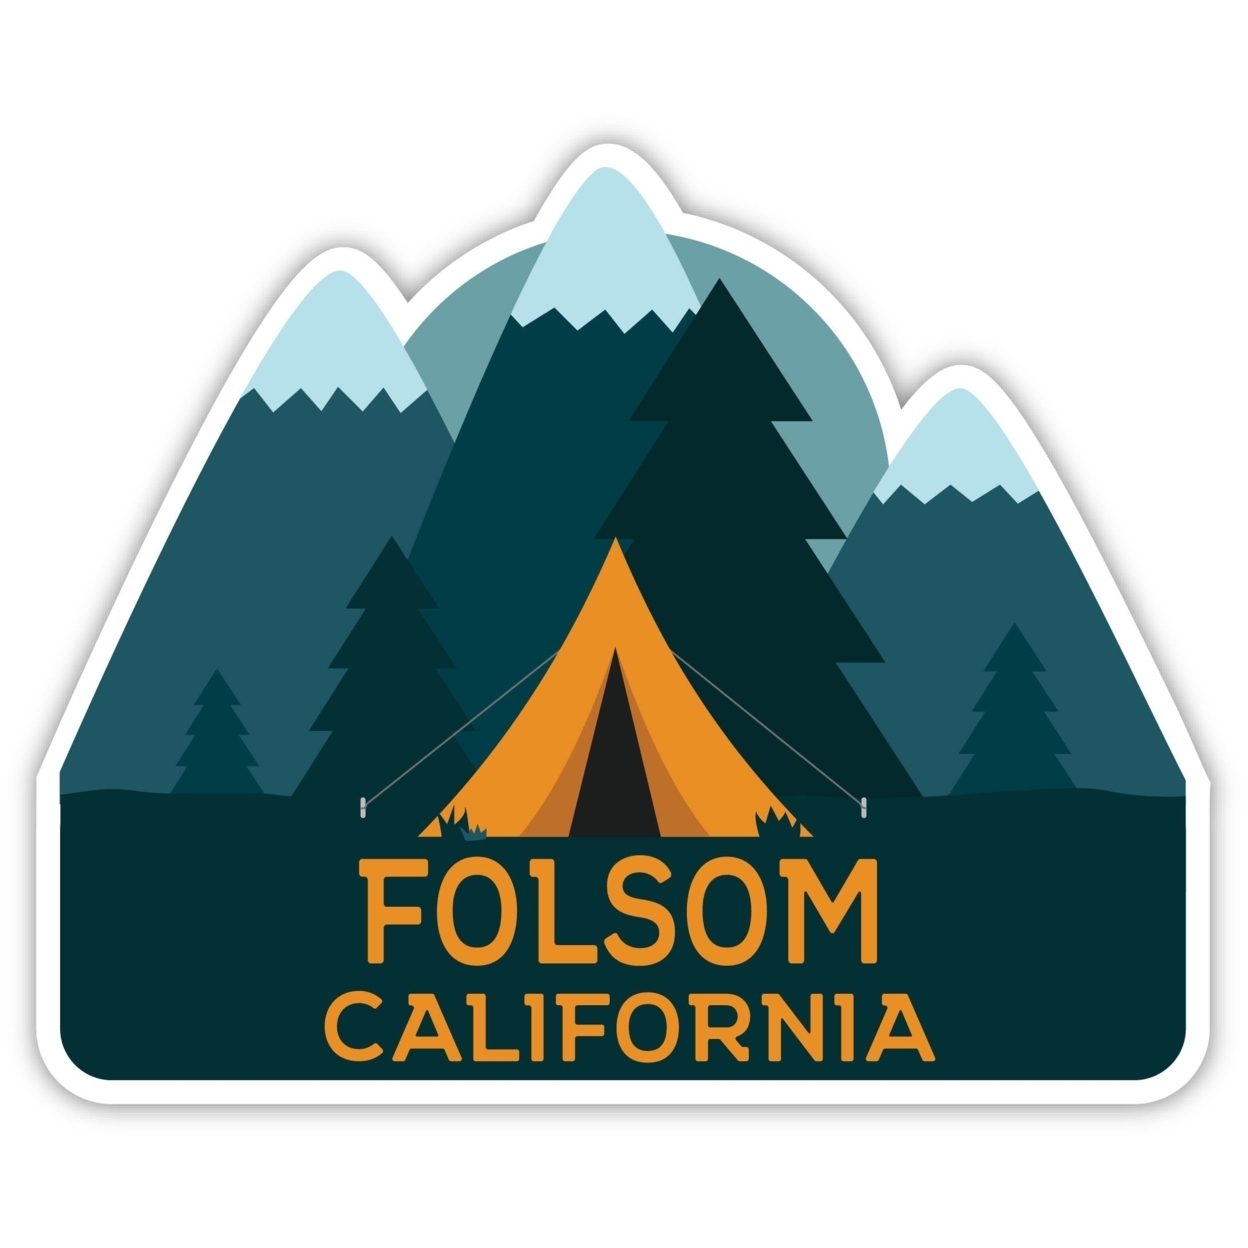 Folsom California Souvenir Decorative Stickers (Choose Theme And Size) - 4-Pack, 6-Inch, Tent